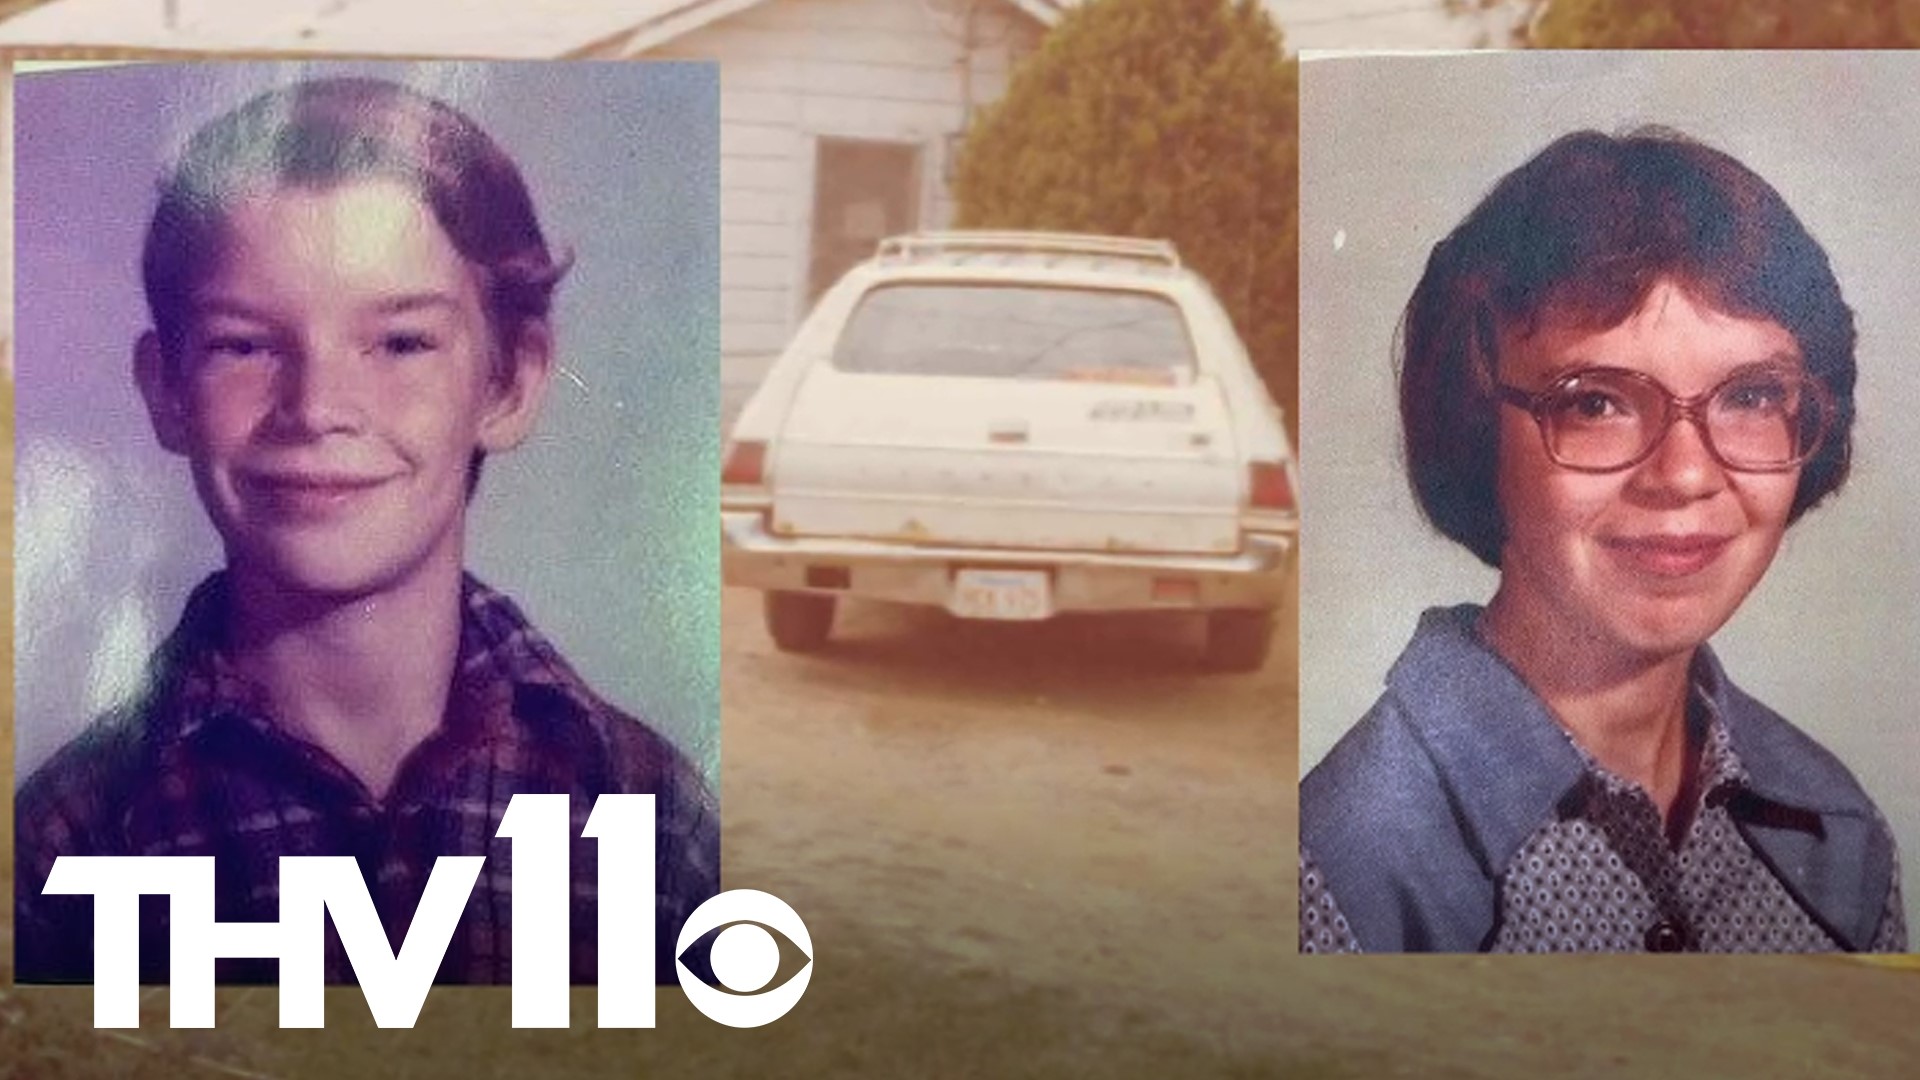 42 years after it happened in 1981, detectives now say they know who killed the Alexander siblings in their Texarkana, Arkansas home.